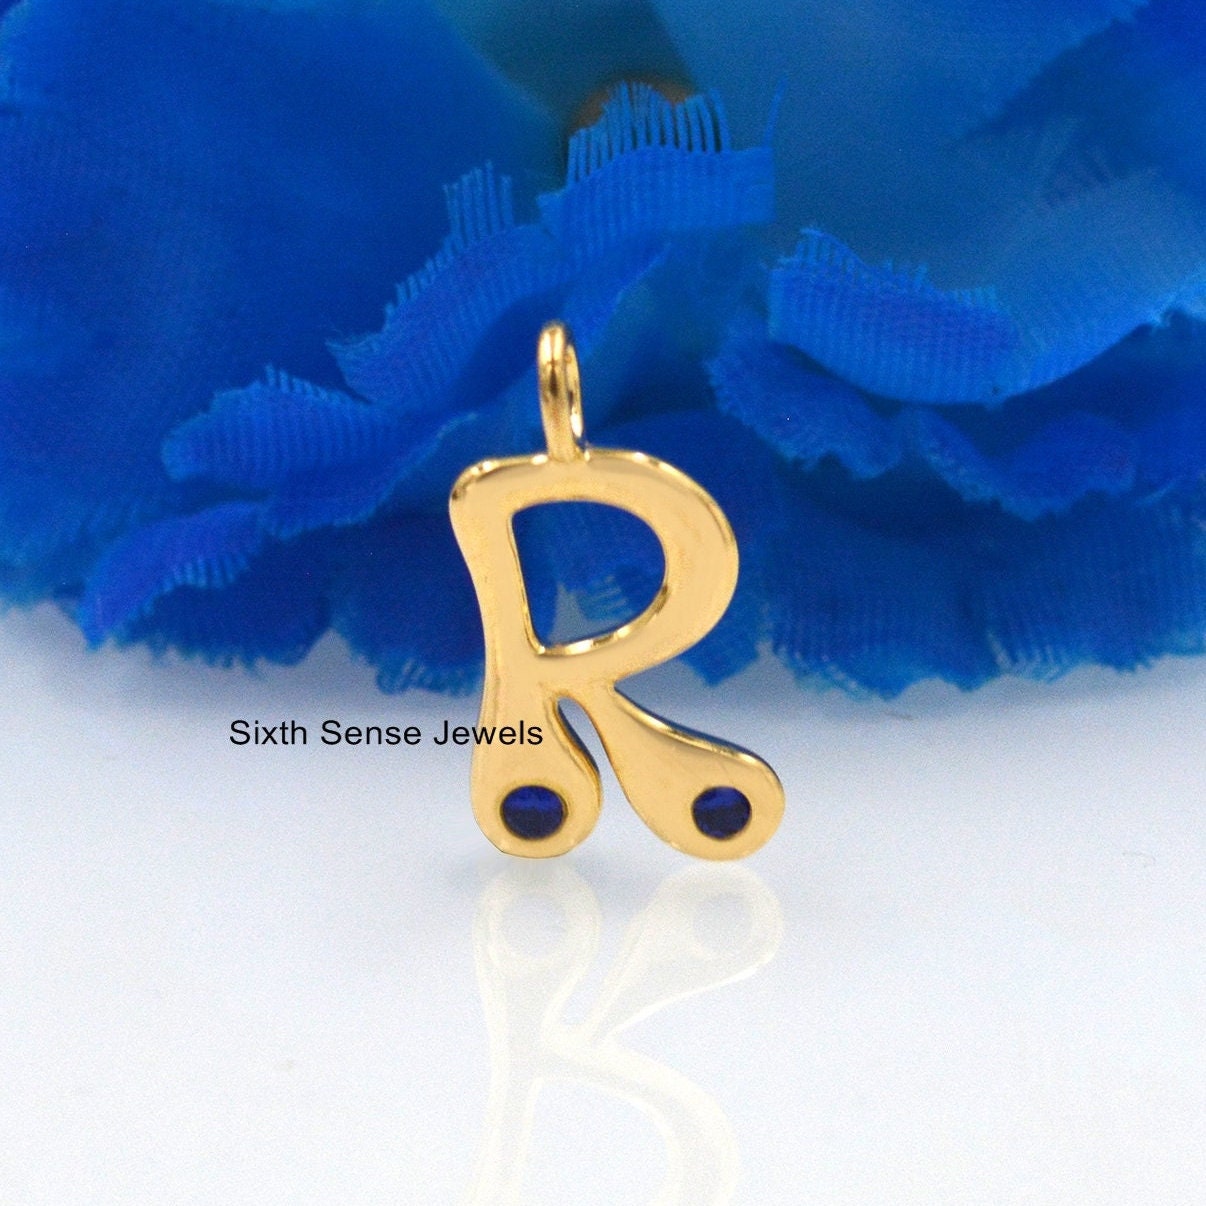 Puffy Letters A-Z Charms  HART Custom Charm Jewelry